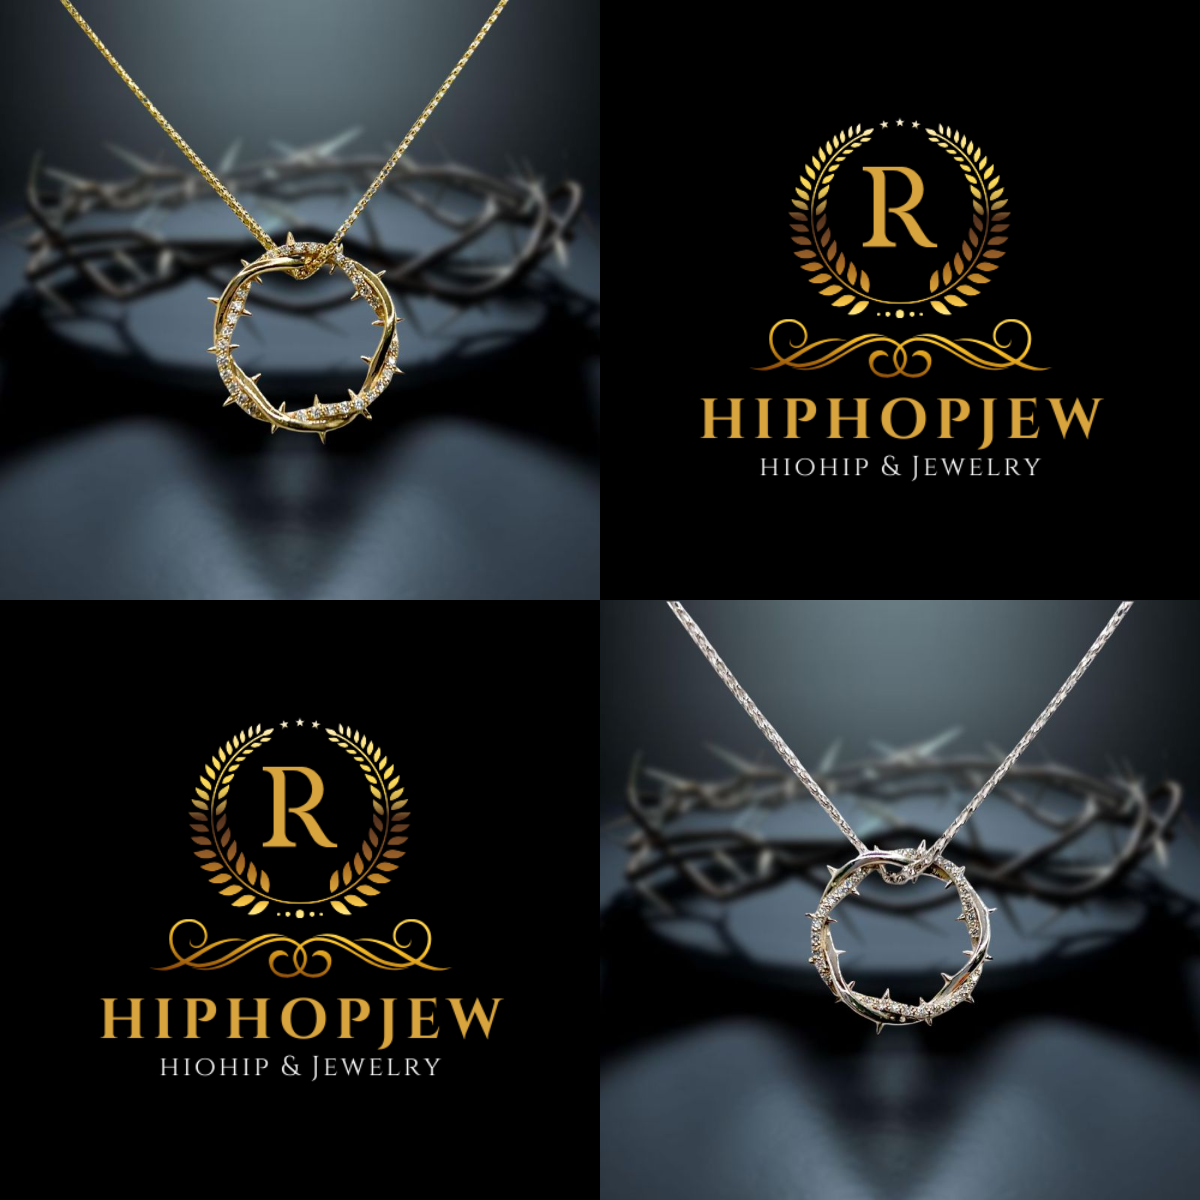 HIPHOPJEW Crown Of Thorns Pendant.